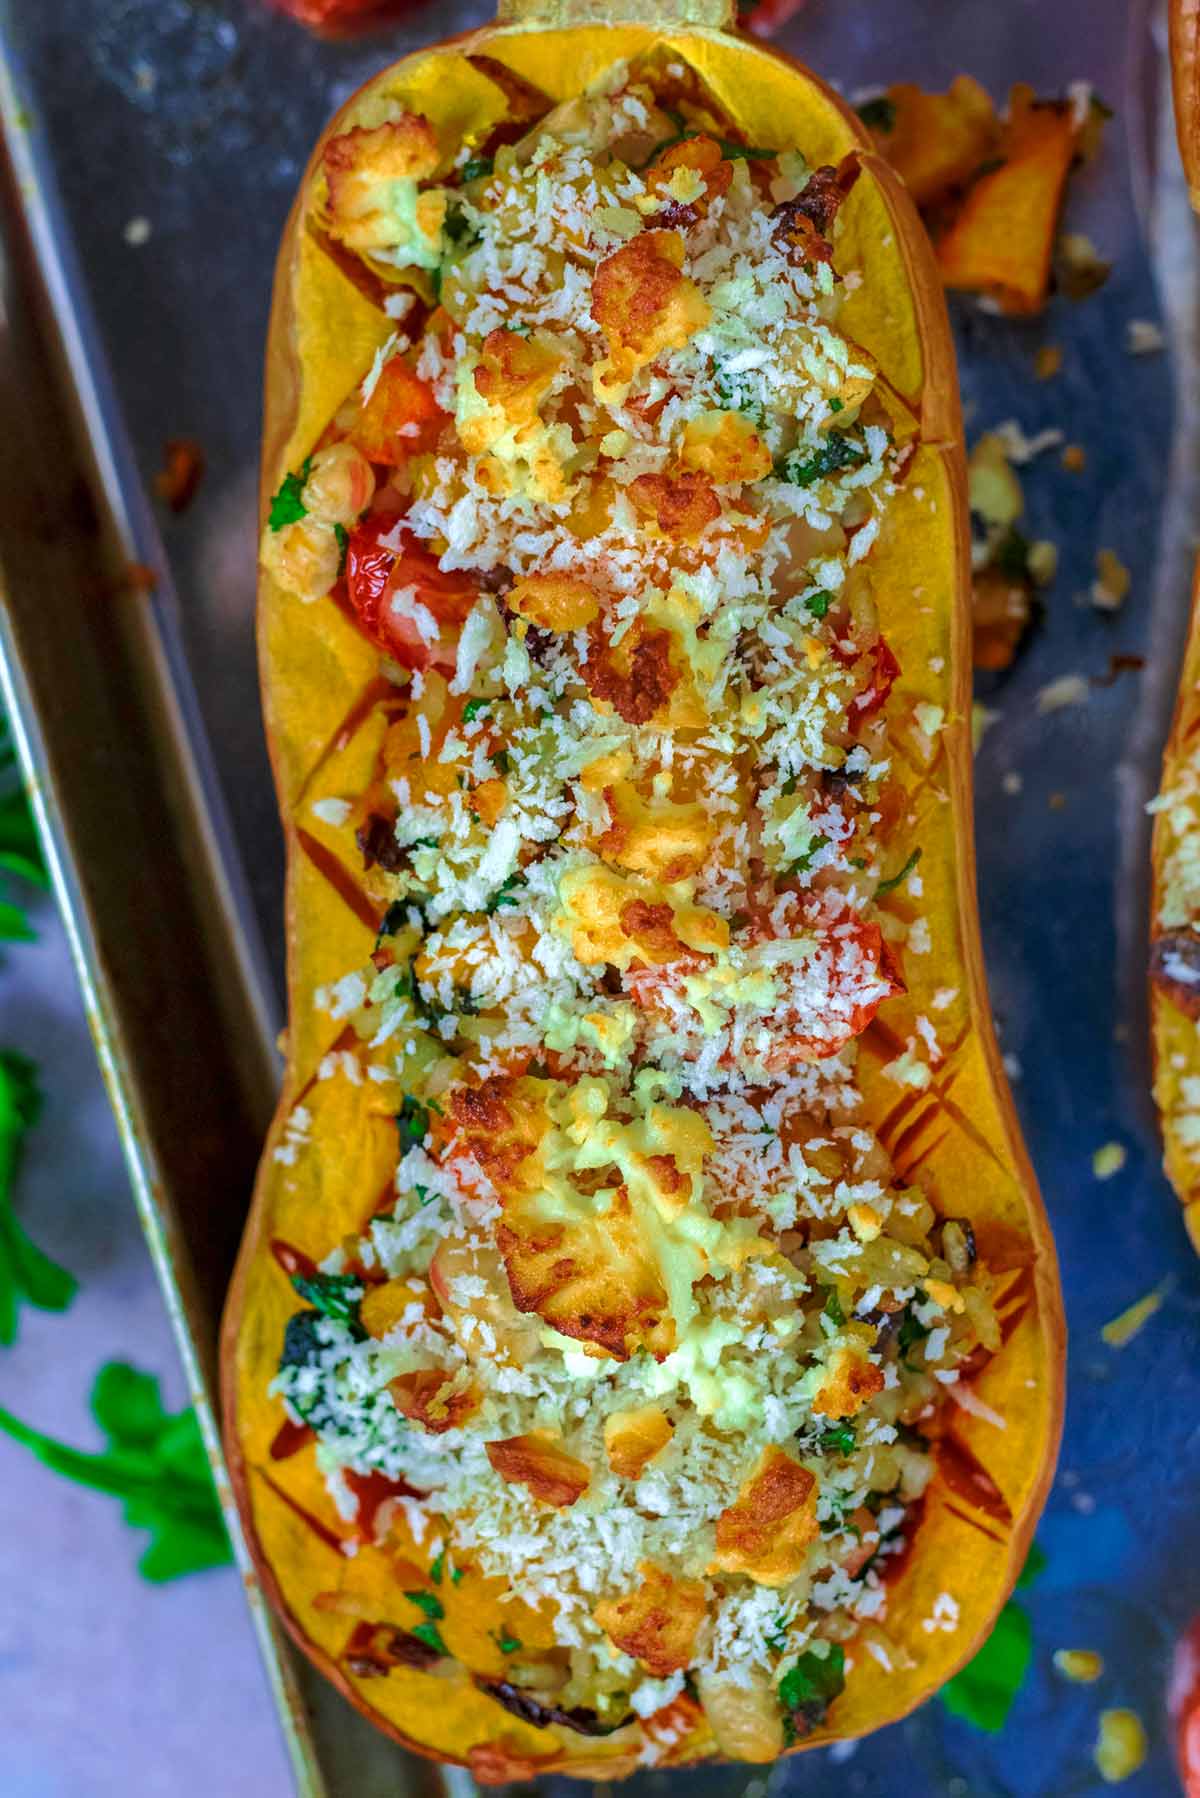 Half a butternut squash stuffed with rice, cheese and vegetables.